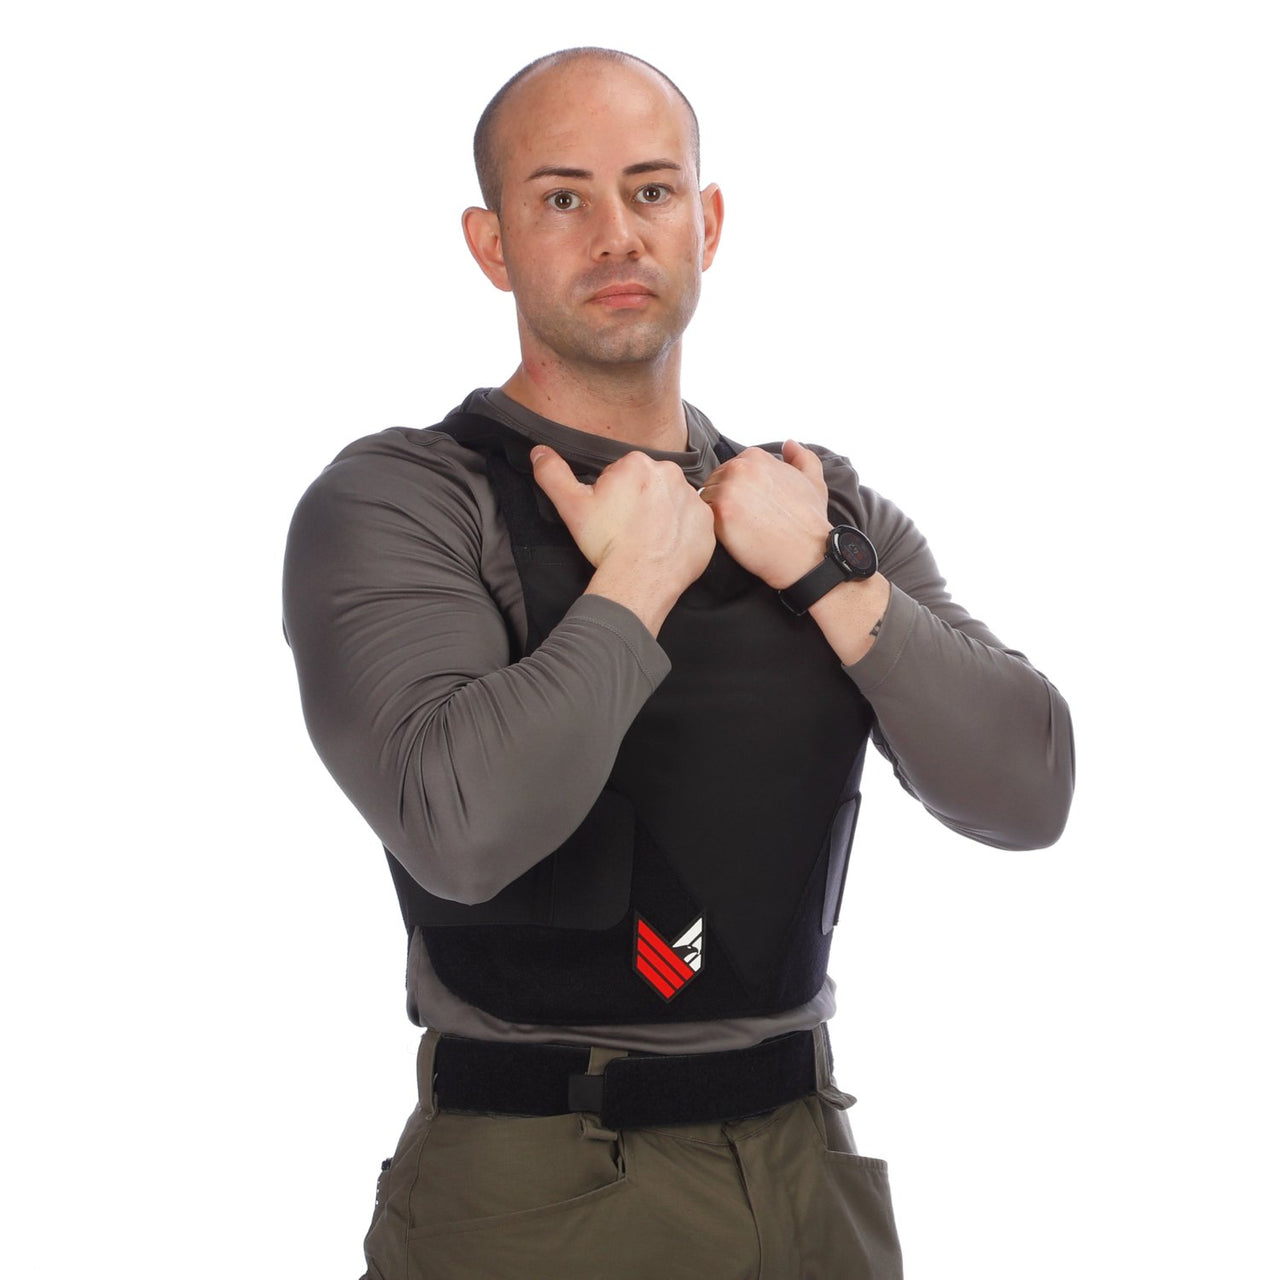 A man posing in front of a white background wearing the Body Armor Direct All American Concealable Enhanced Multi-Threat Vest from Body Armor Direct.